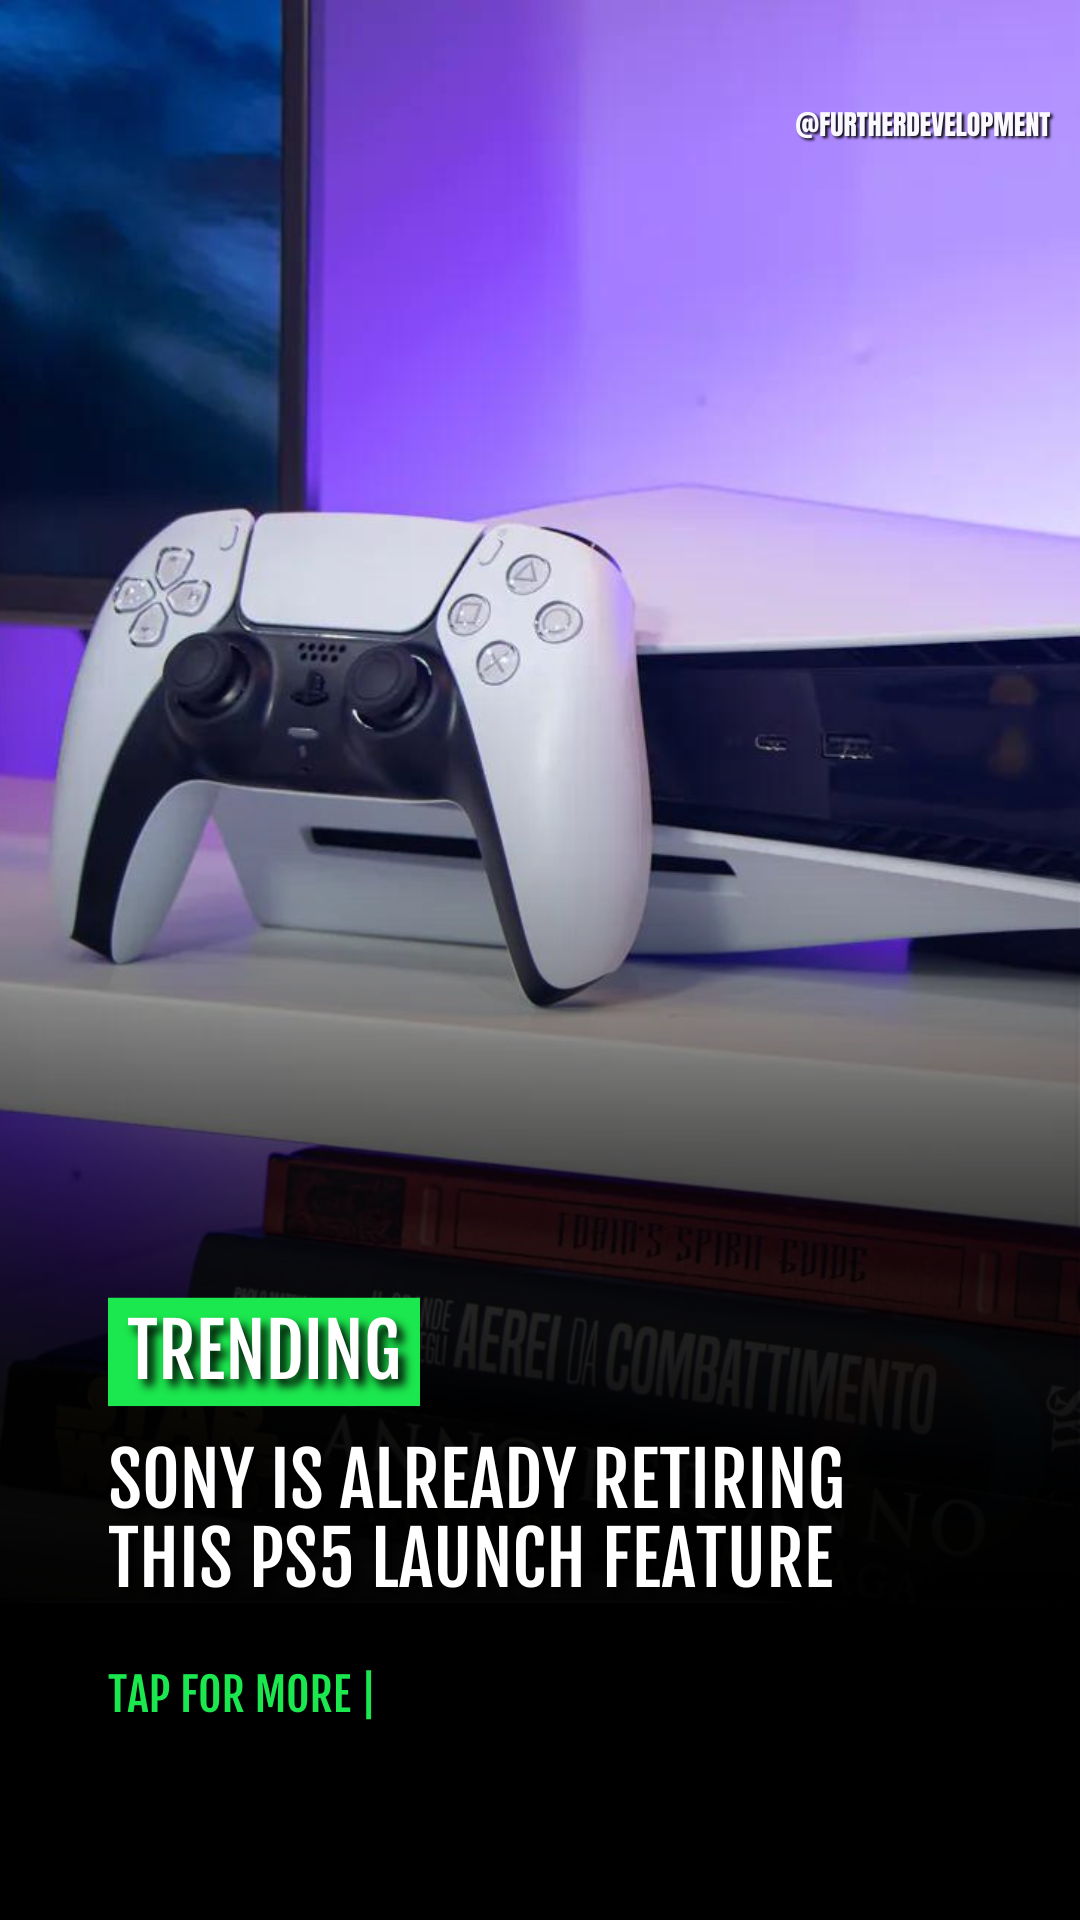 Sony is already retiring this PS5 launch feature